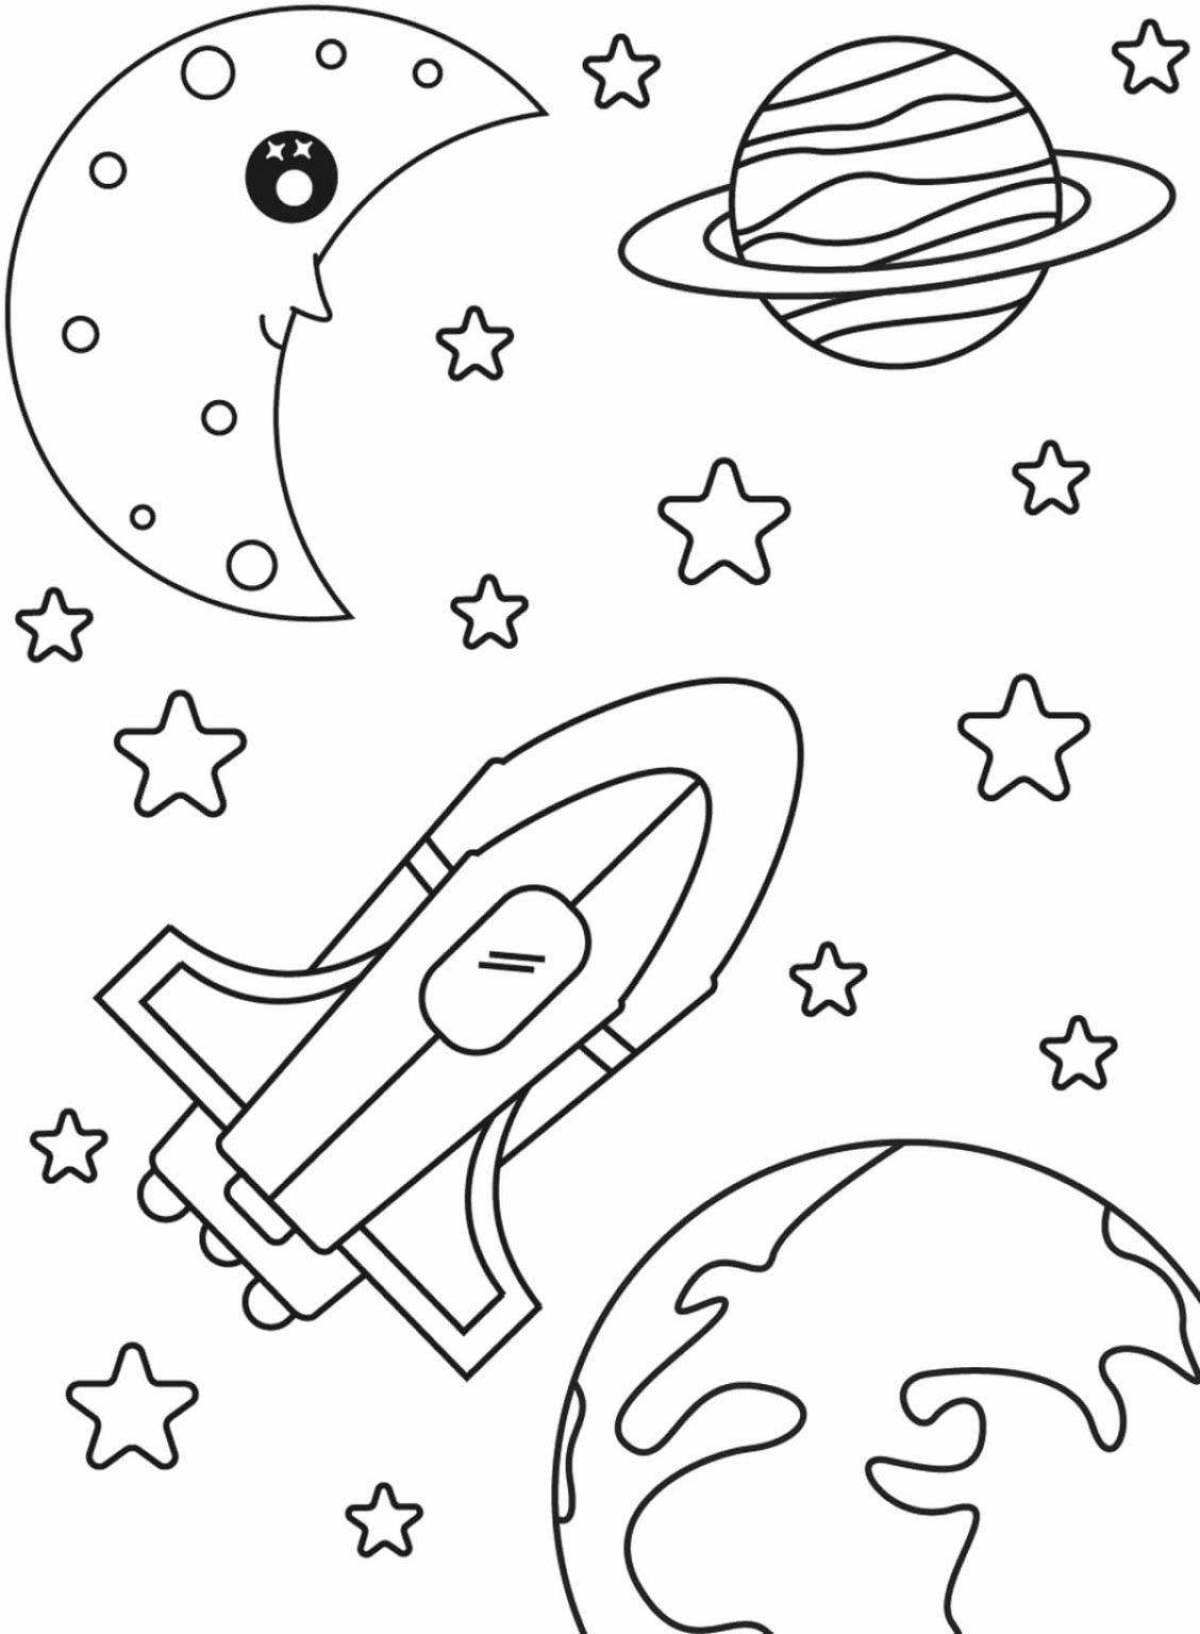 Fun space coloring book for 5-6 year olds